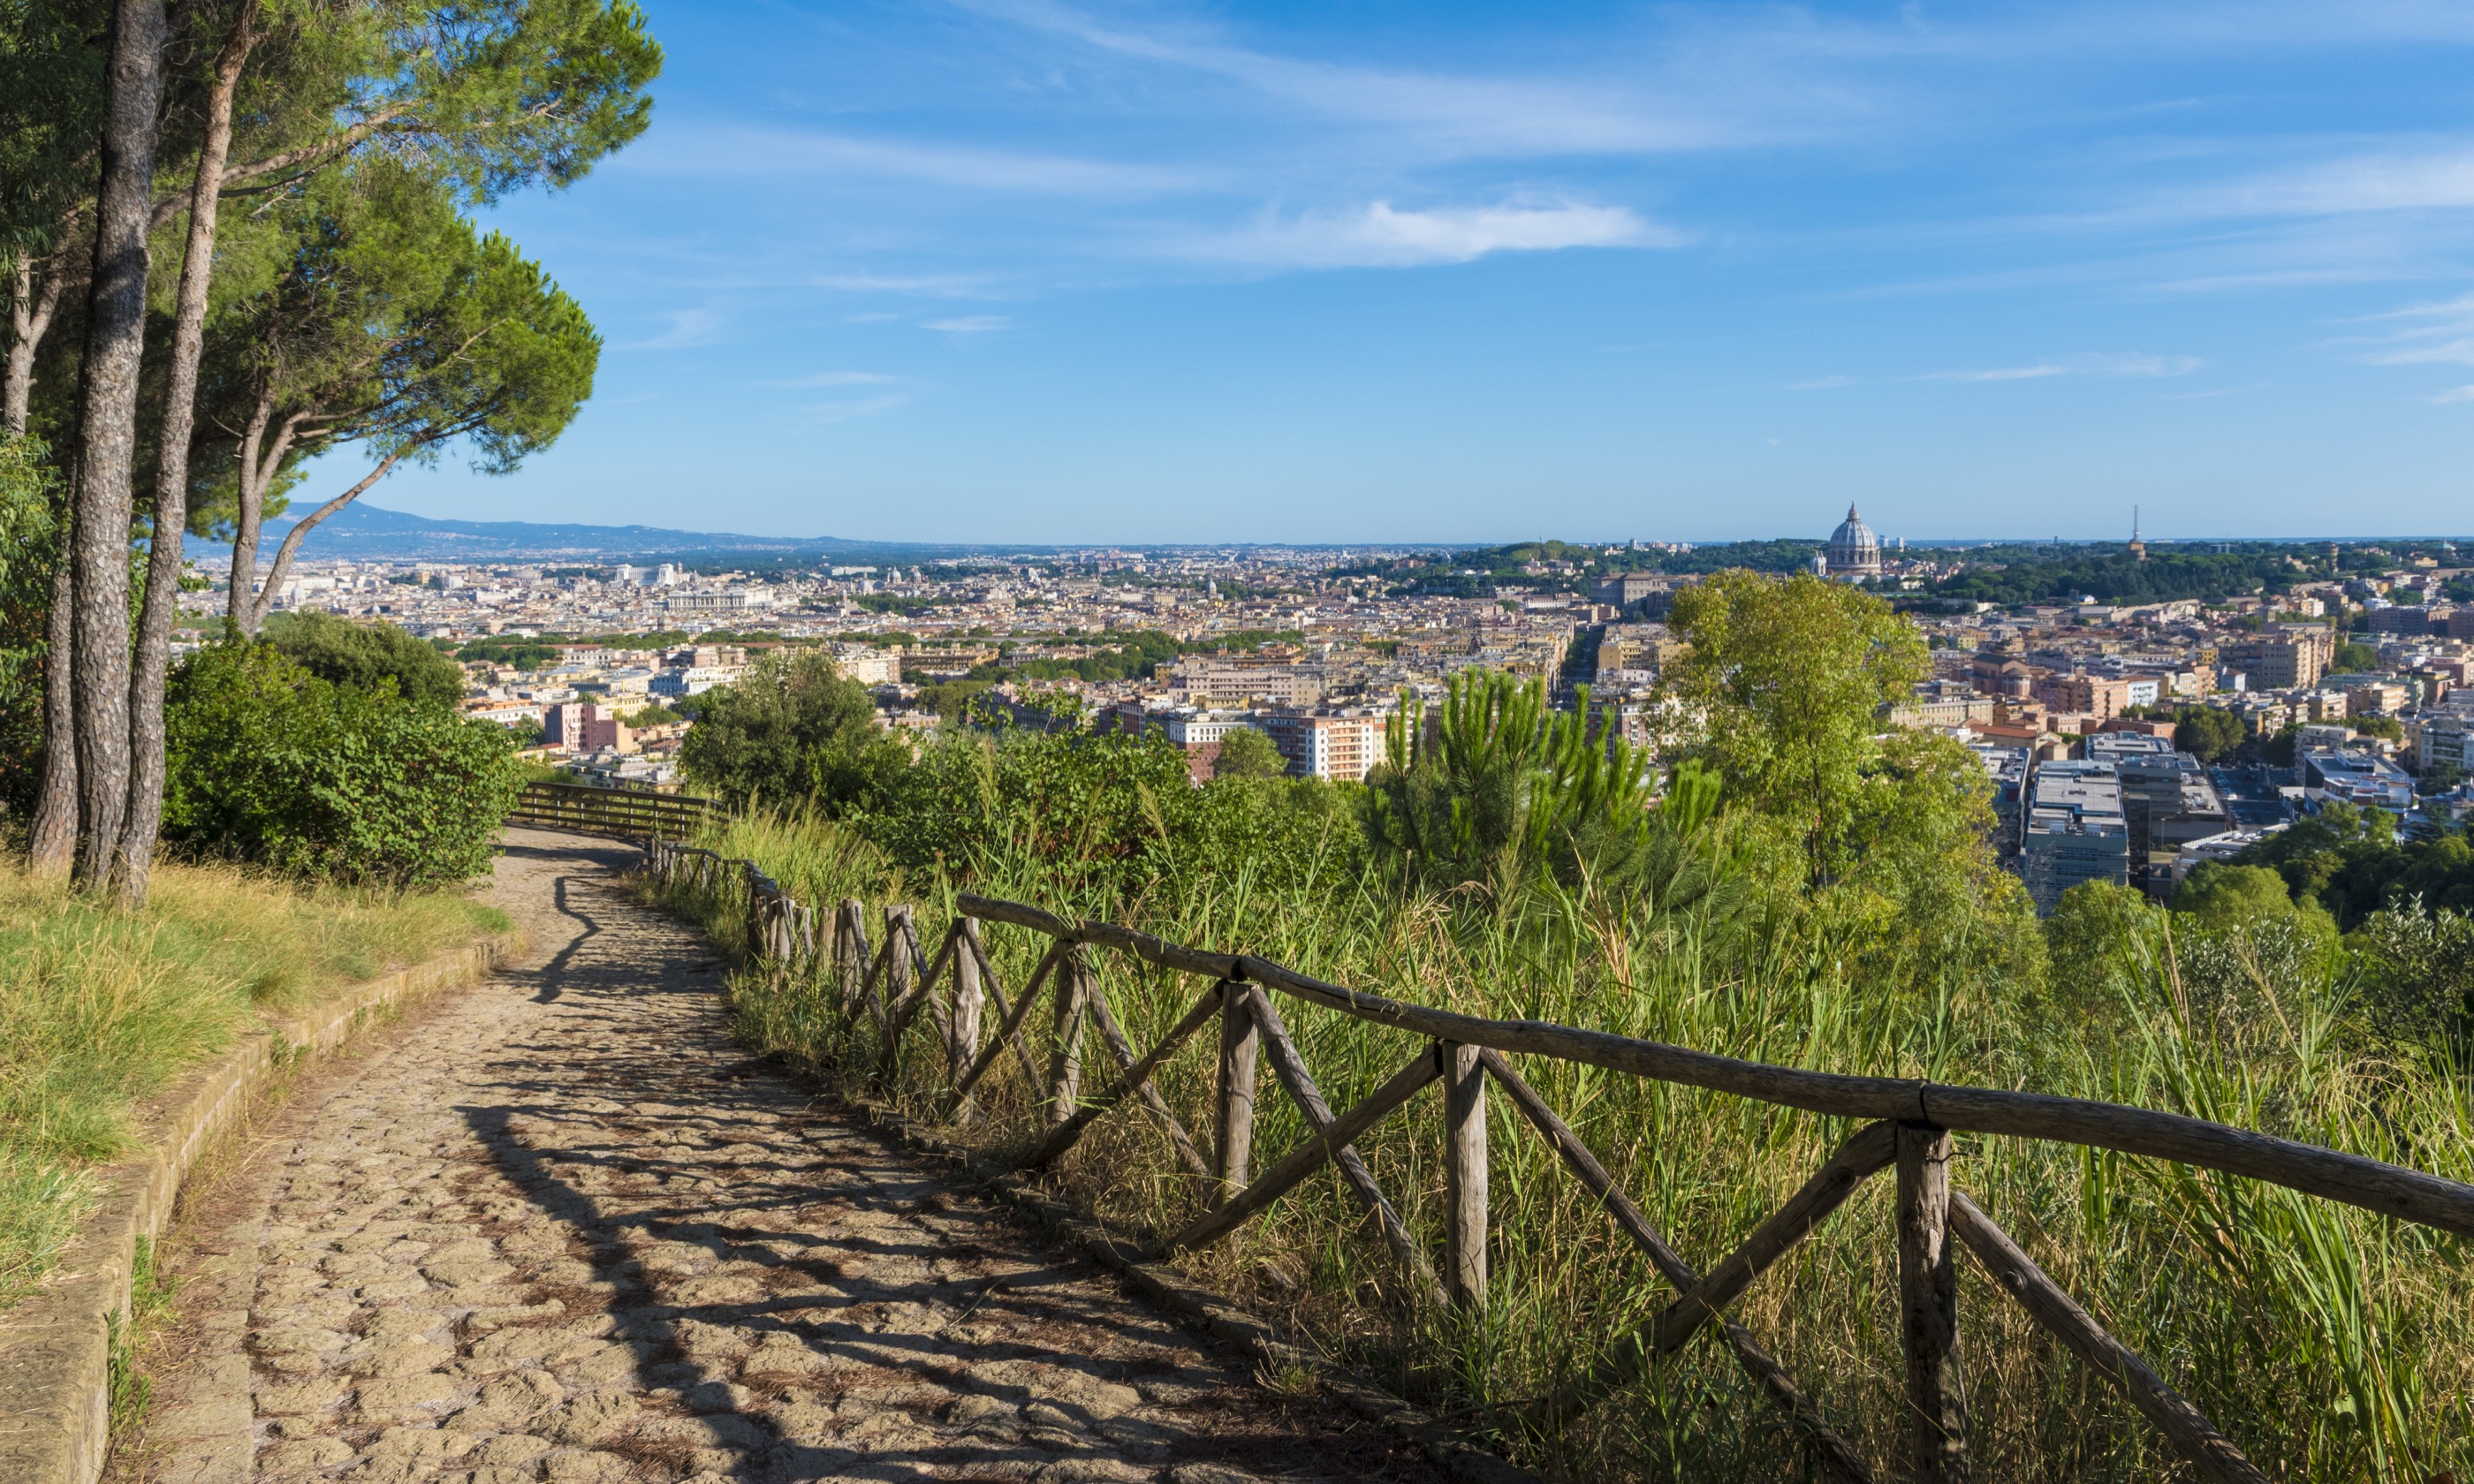 View of Rome from the hills (Dreamstime)